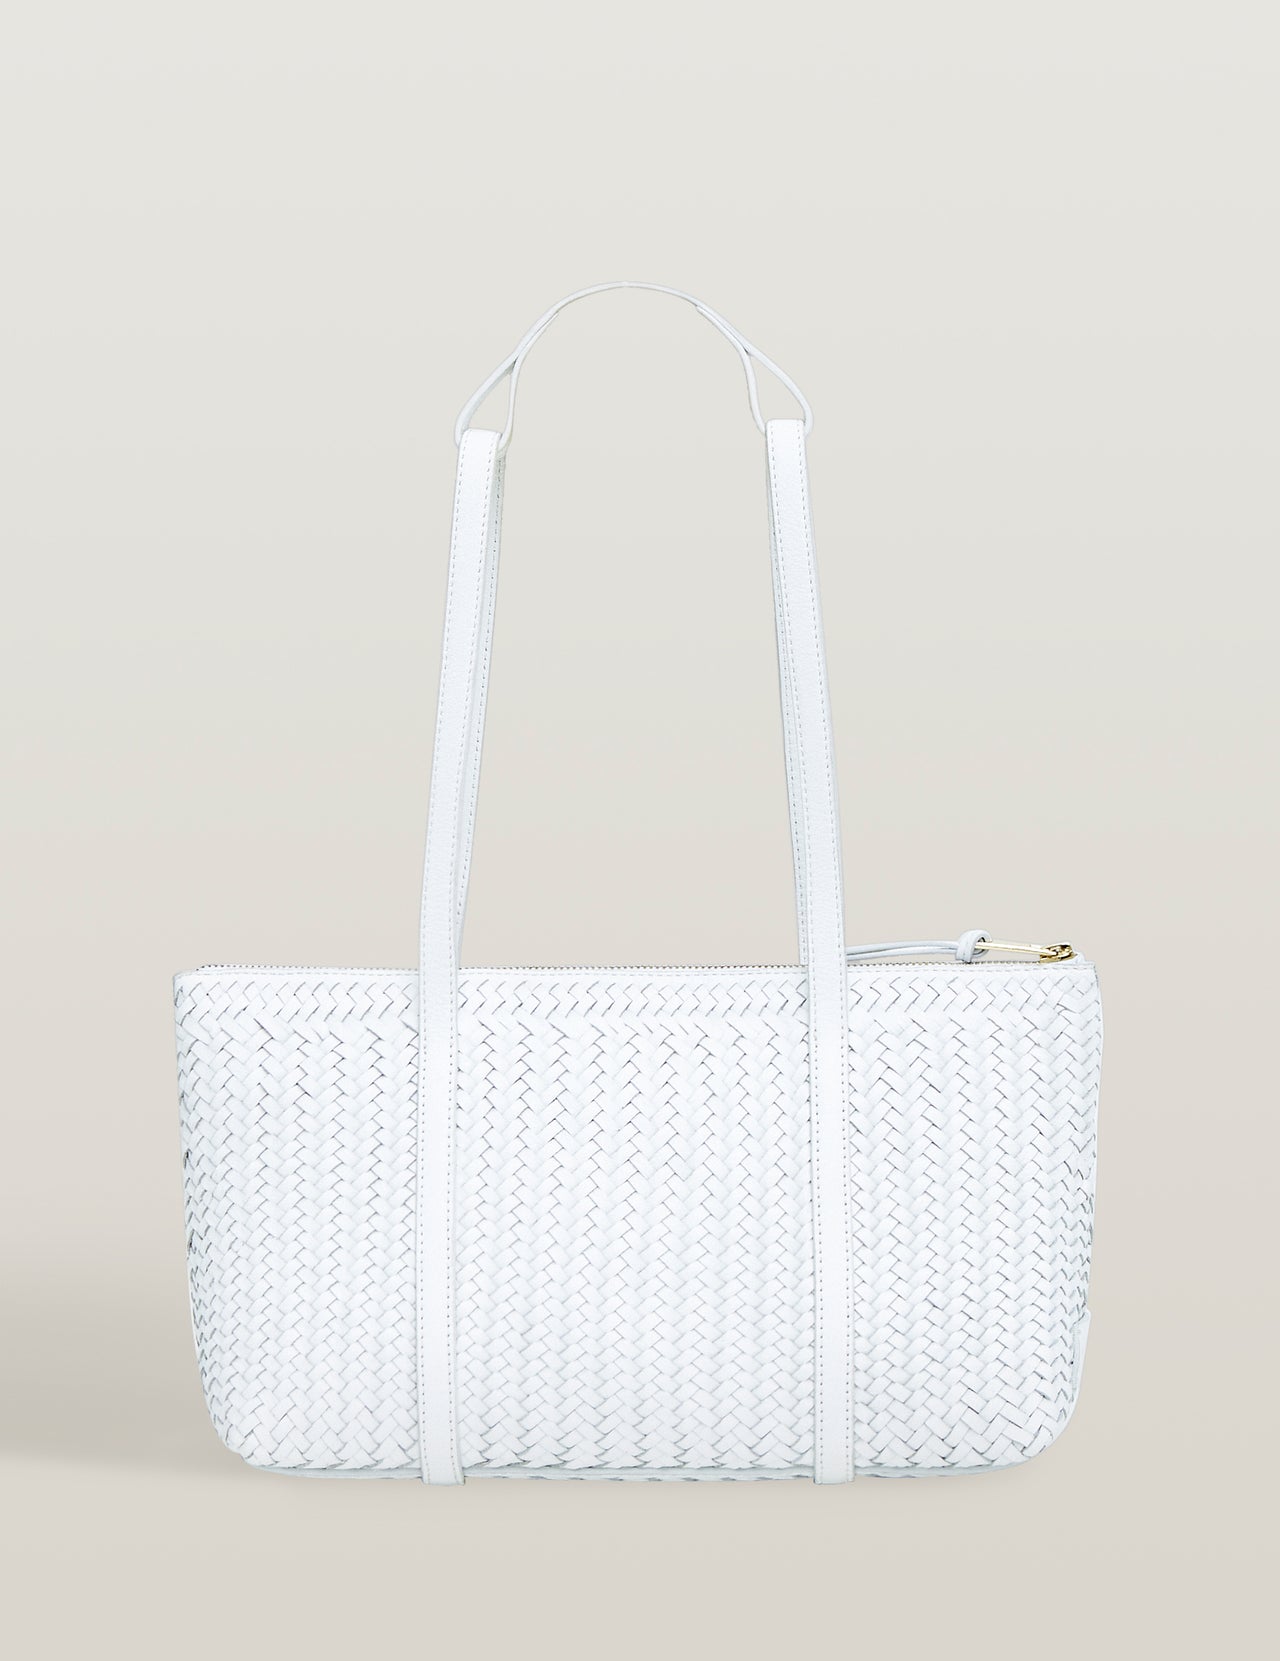  White Handwoven Leather Tote Bag 